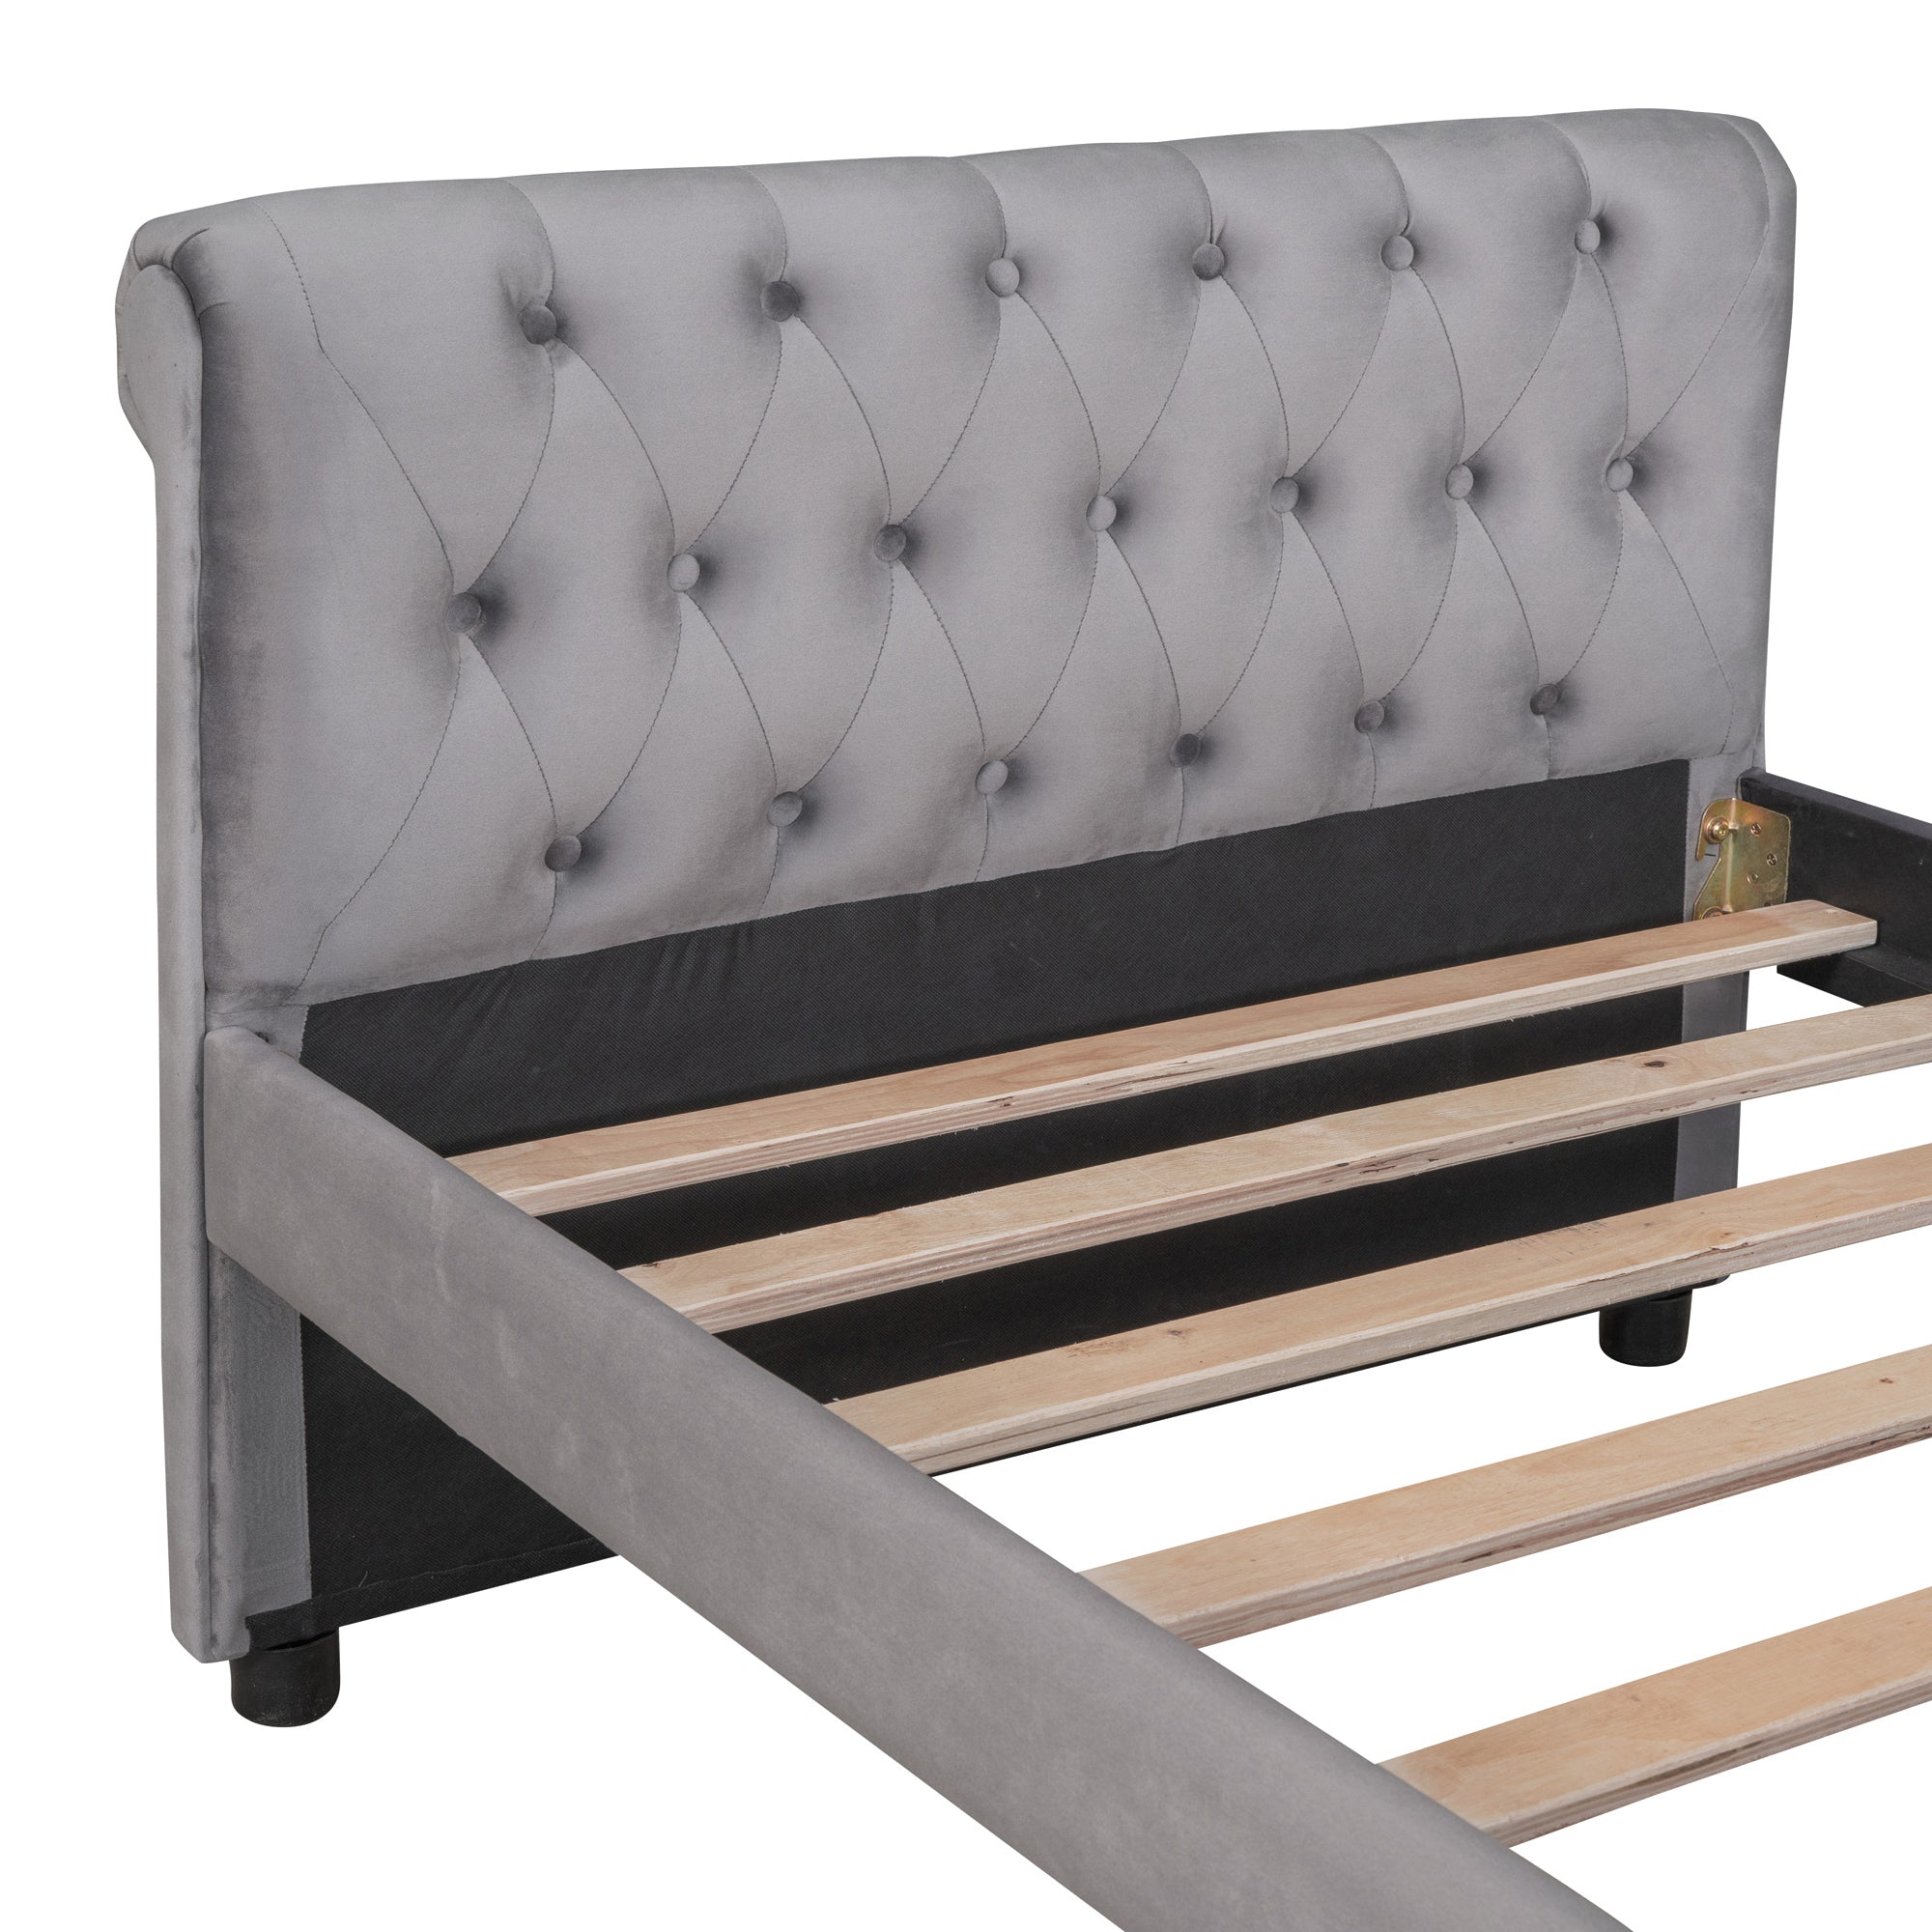 Twin Size Upholstered daybed with Drawers, Wood Slat gray-upholstered